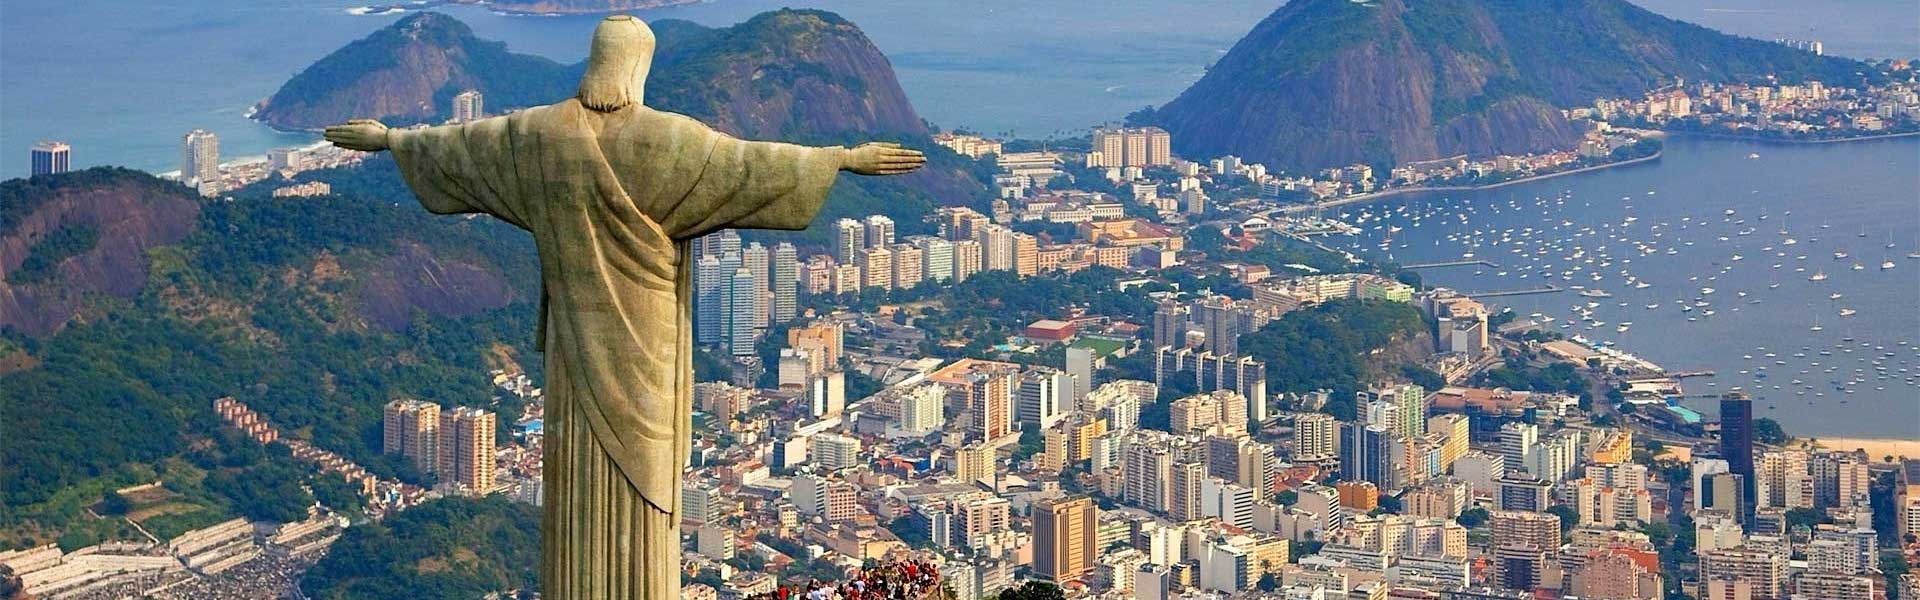 Brazil’s 10% inflation is eroding incomes and the president’s popularity